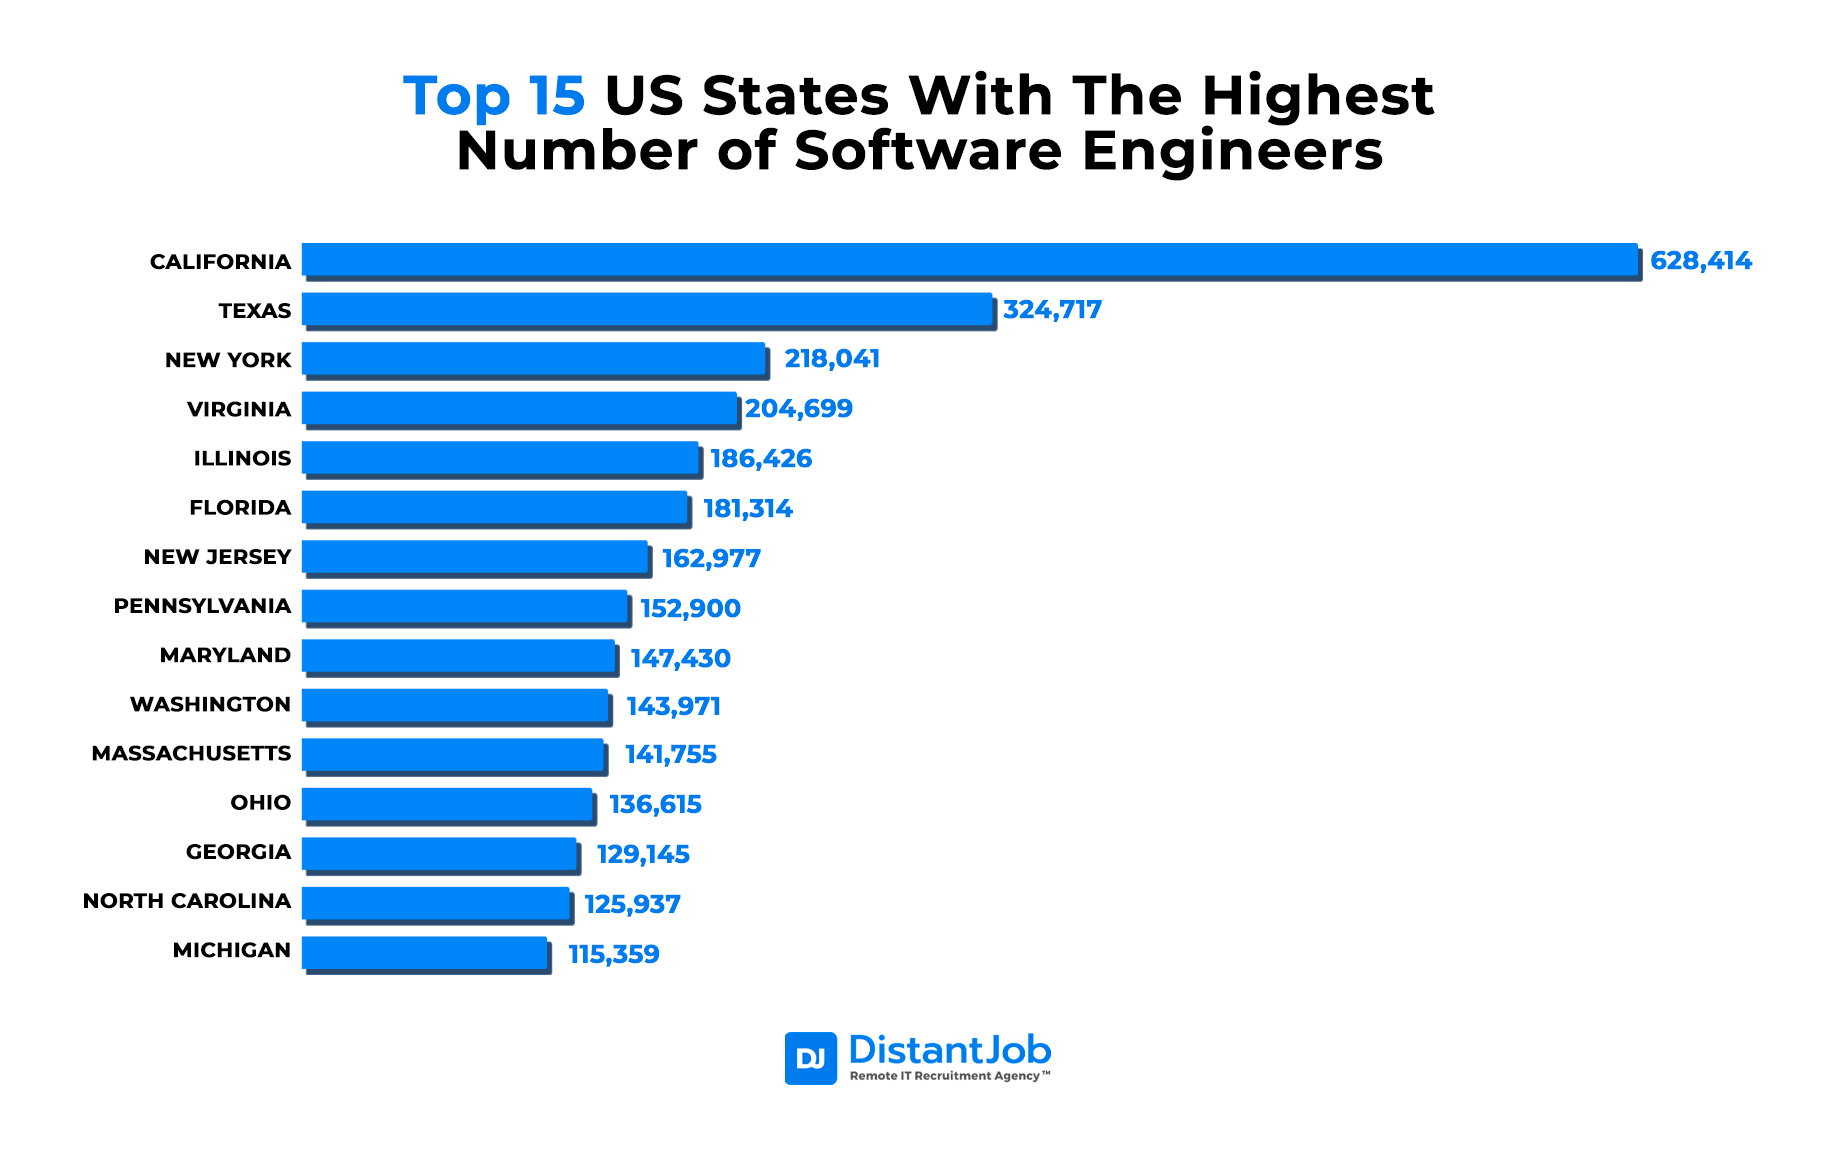 Top US states with the highest number of software engineers